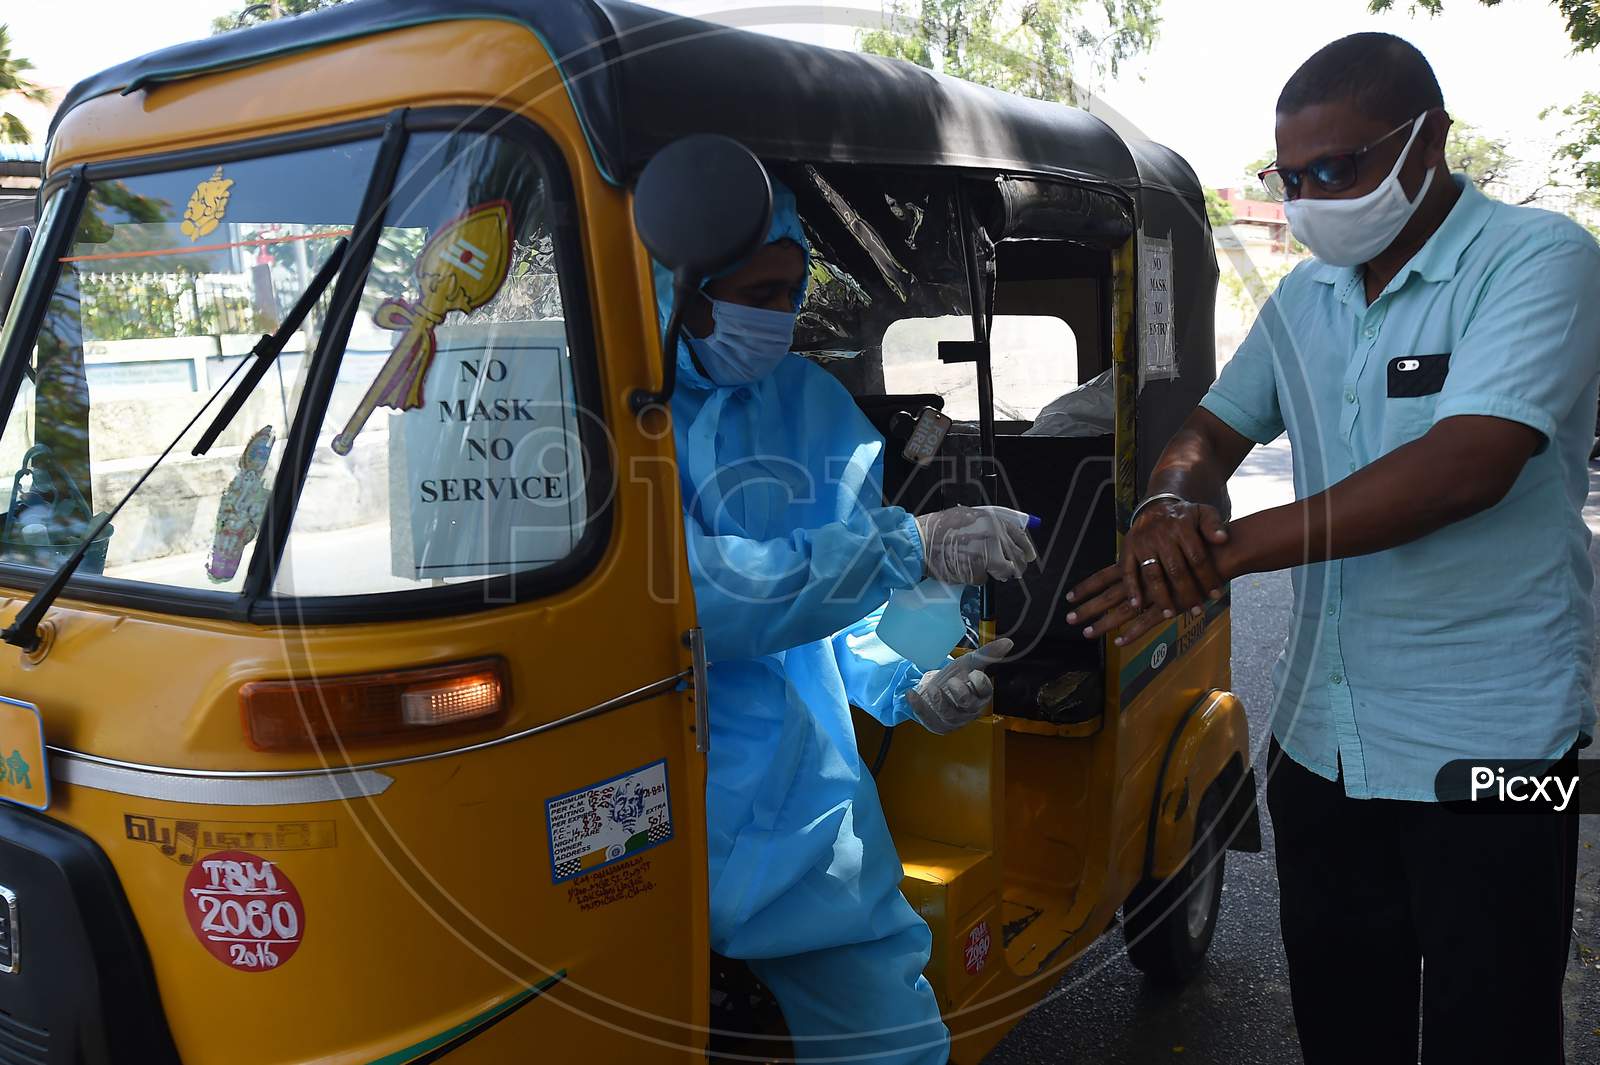 An Auto Rickshaw Driver Wearing Personal Protective Equipment  (Ppe) Sprays Sanitiser On The Hands Of A Customer in Chennai, Tamil Nadu